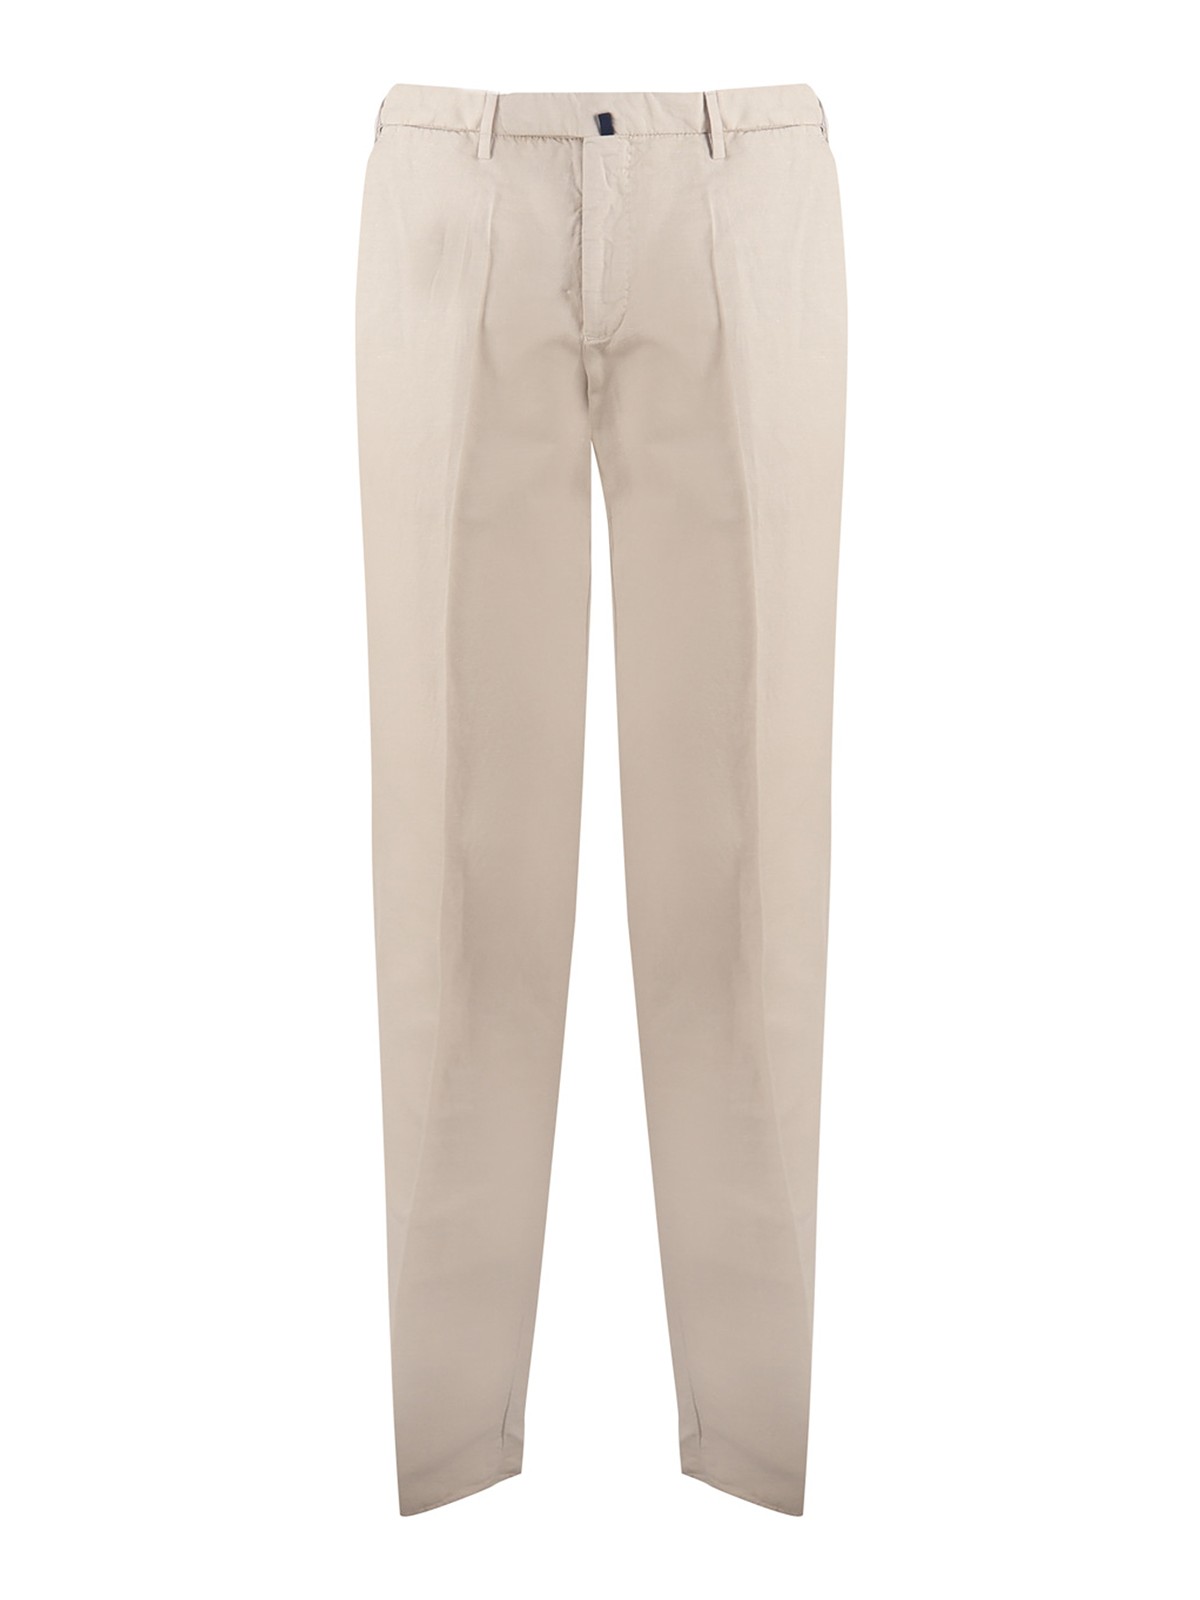 Incotex Trousers In Cotton Blend Twill In Beige